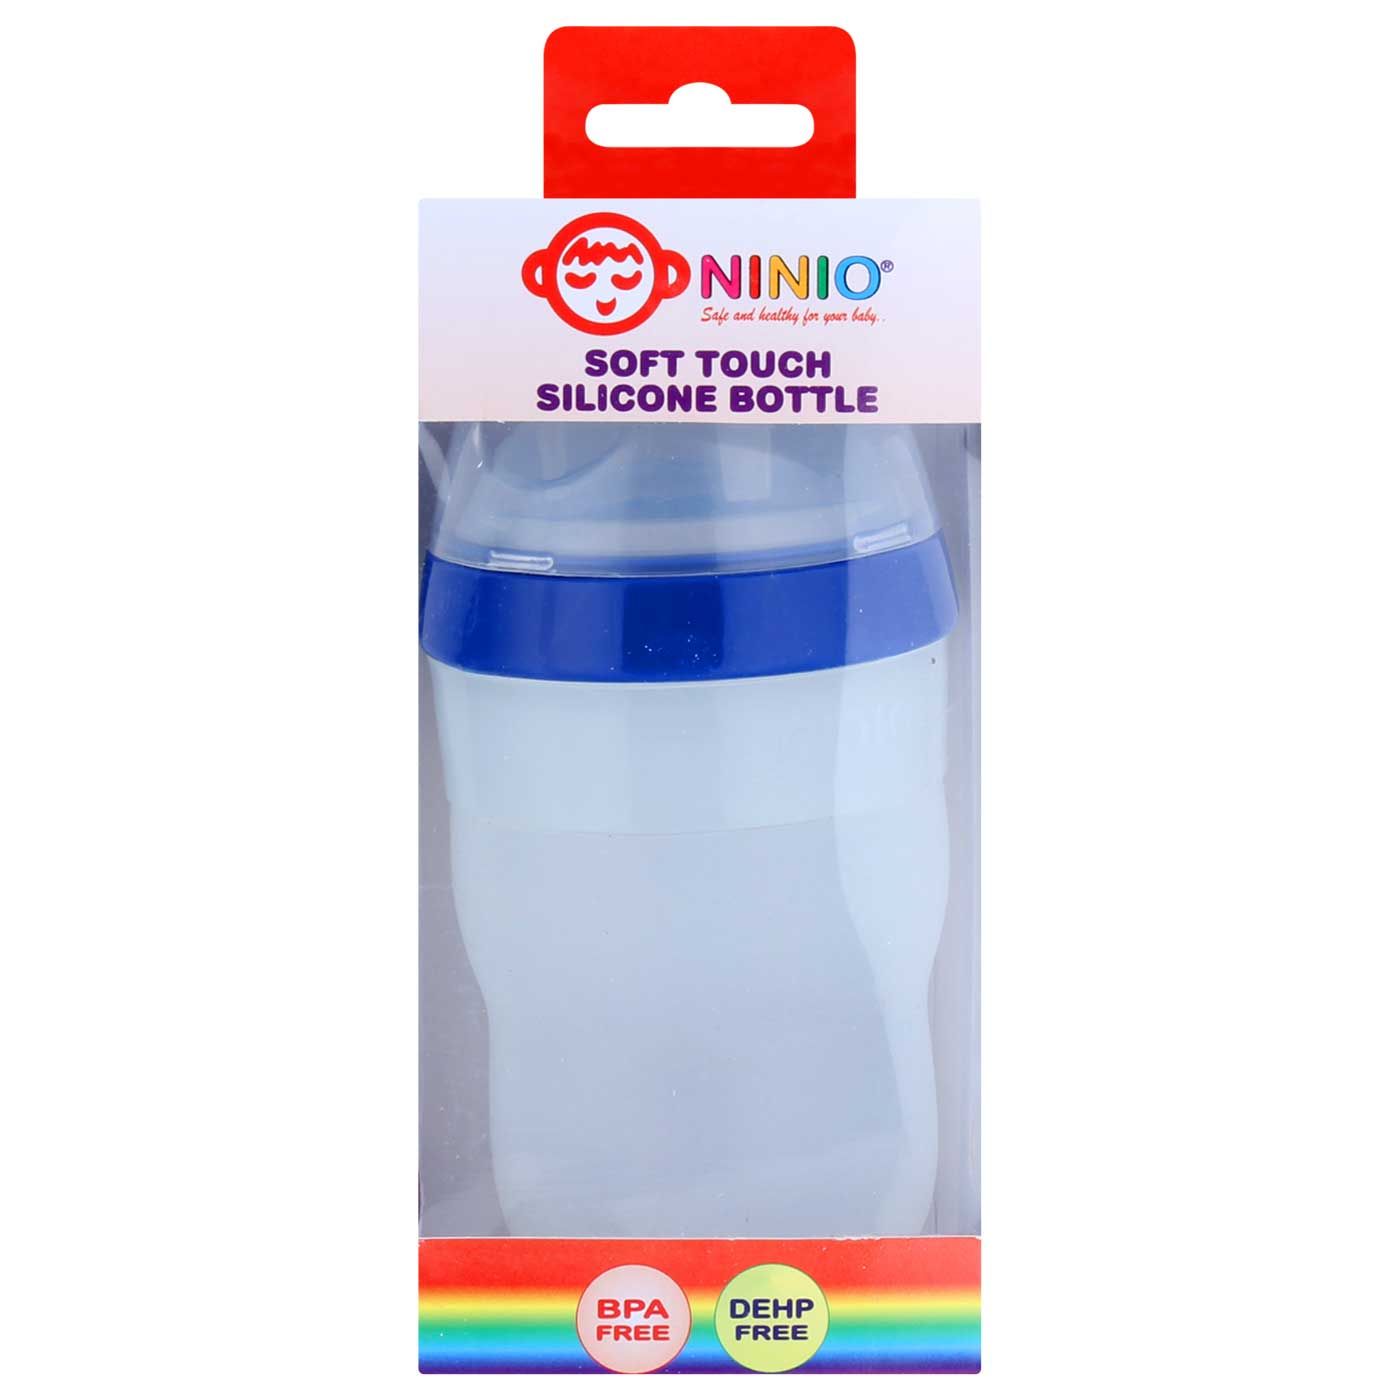 Ninio Silicone Bottle with Filter 7oz Blue - 4